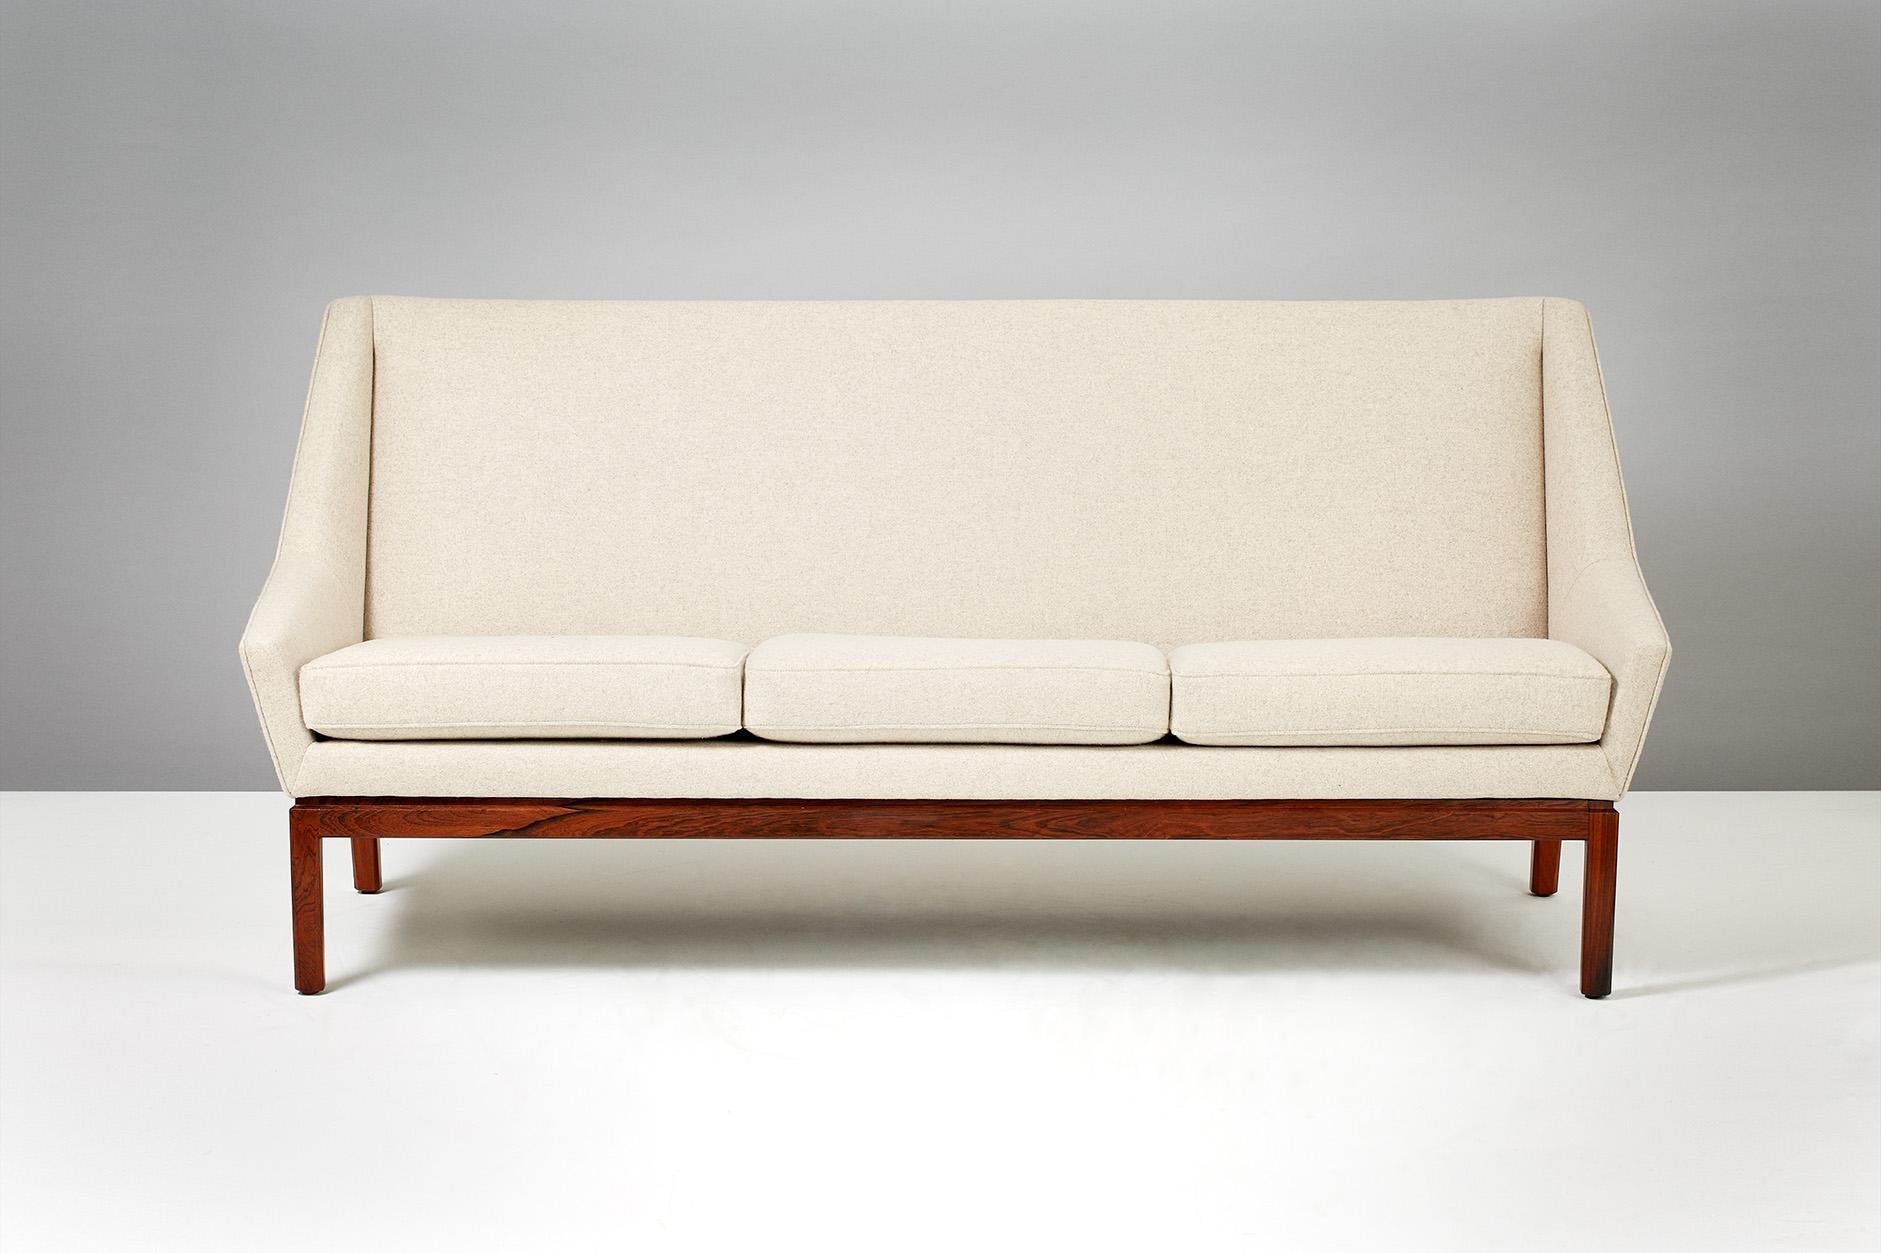 Sofa produced by master cabinetmaker Peder Pedersen with rosewood base. New upholstery in Kvadrat Divina wool fabric. 

